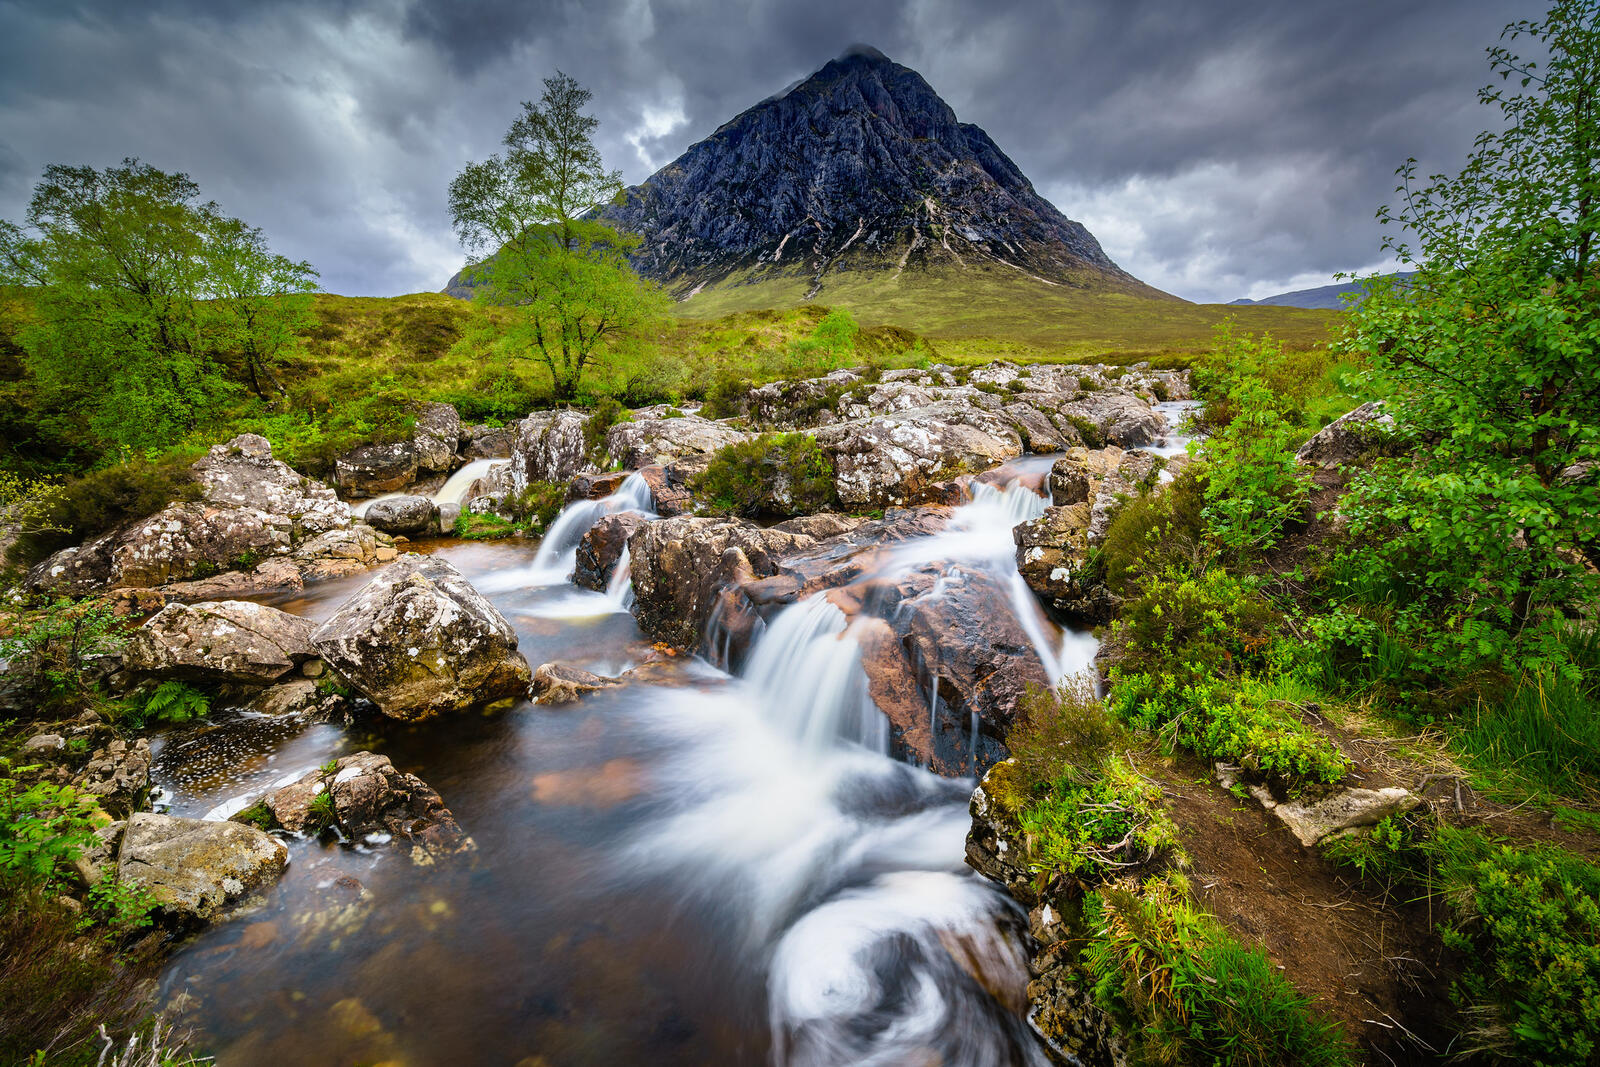 Wallpapers Waterfall on the mountain Pyramid of Buachaille Etive Mor United KINGDOM Scotland on the desktop